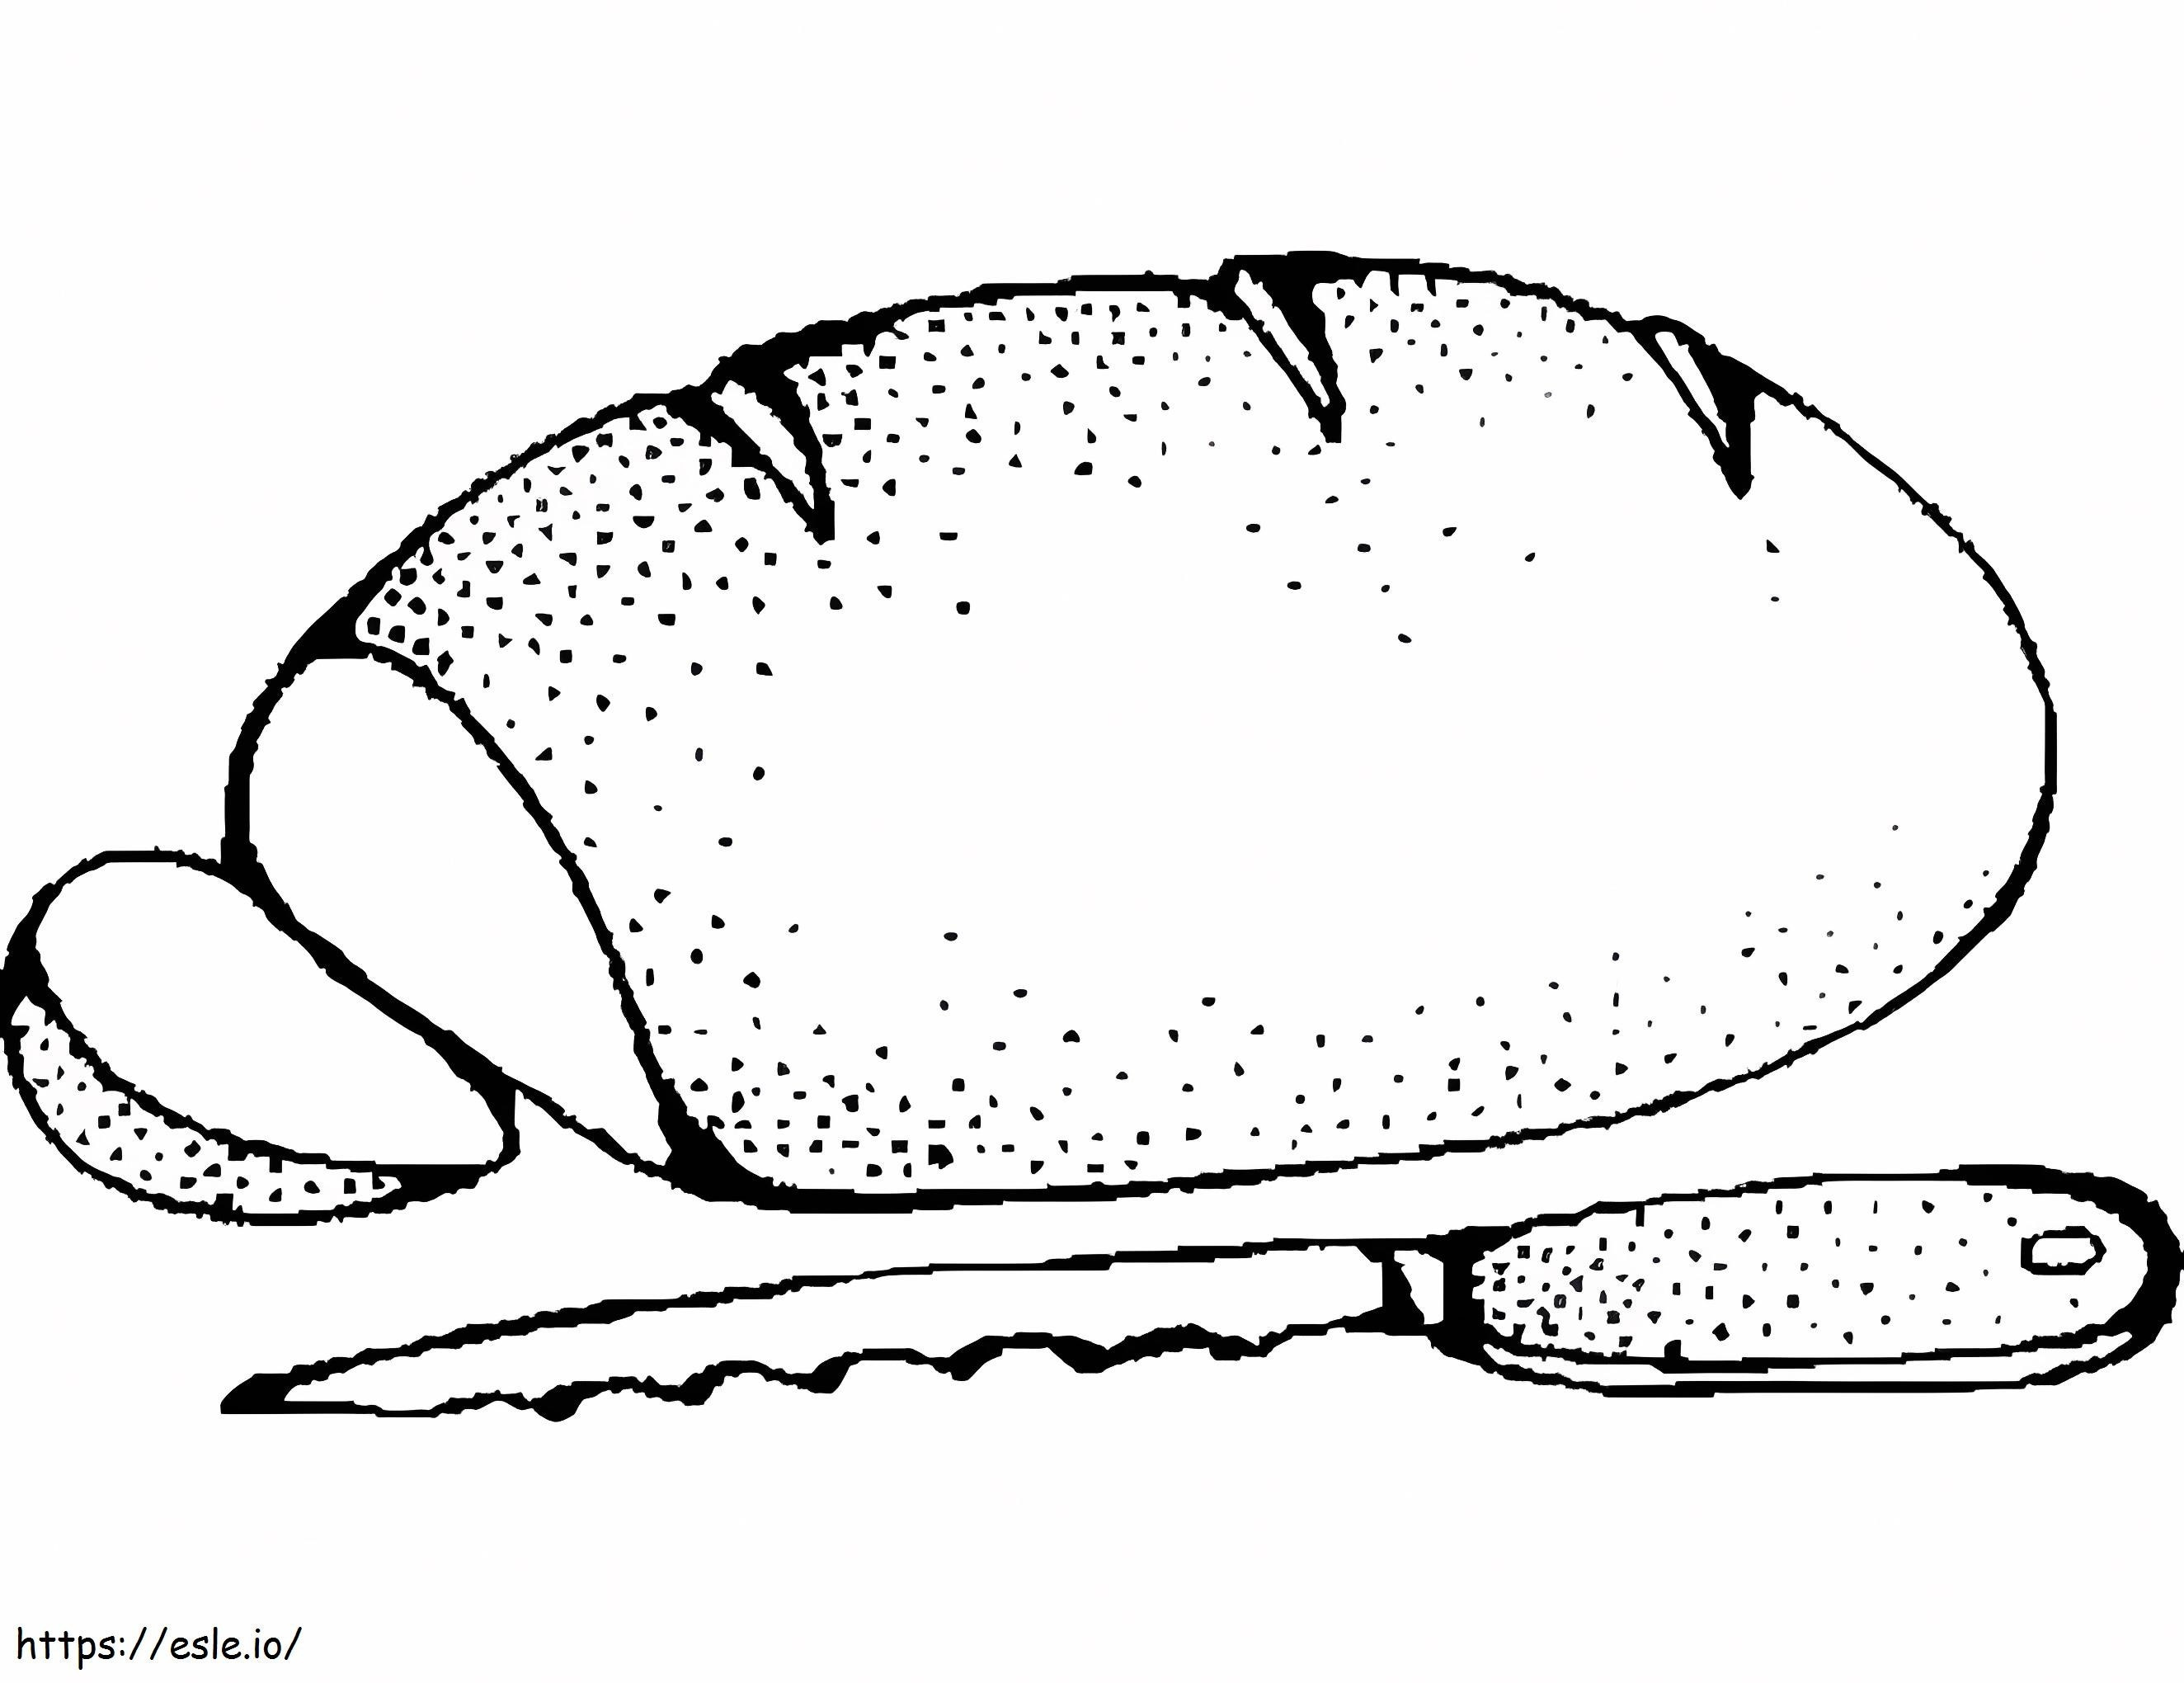 Sliced Baked Bread coloring page